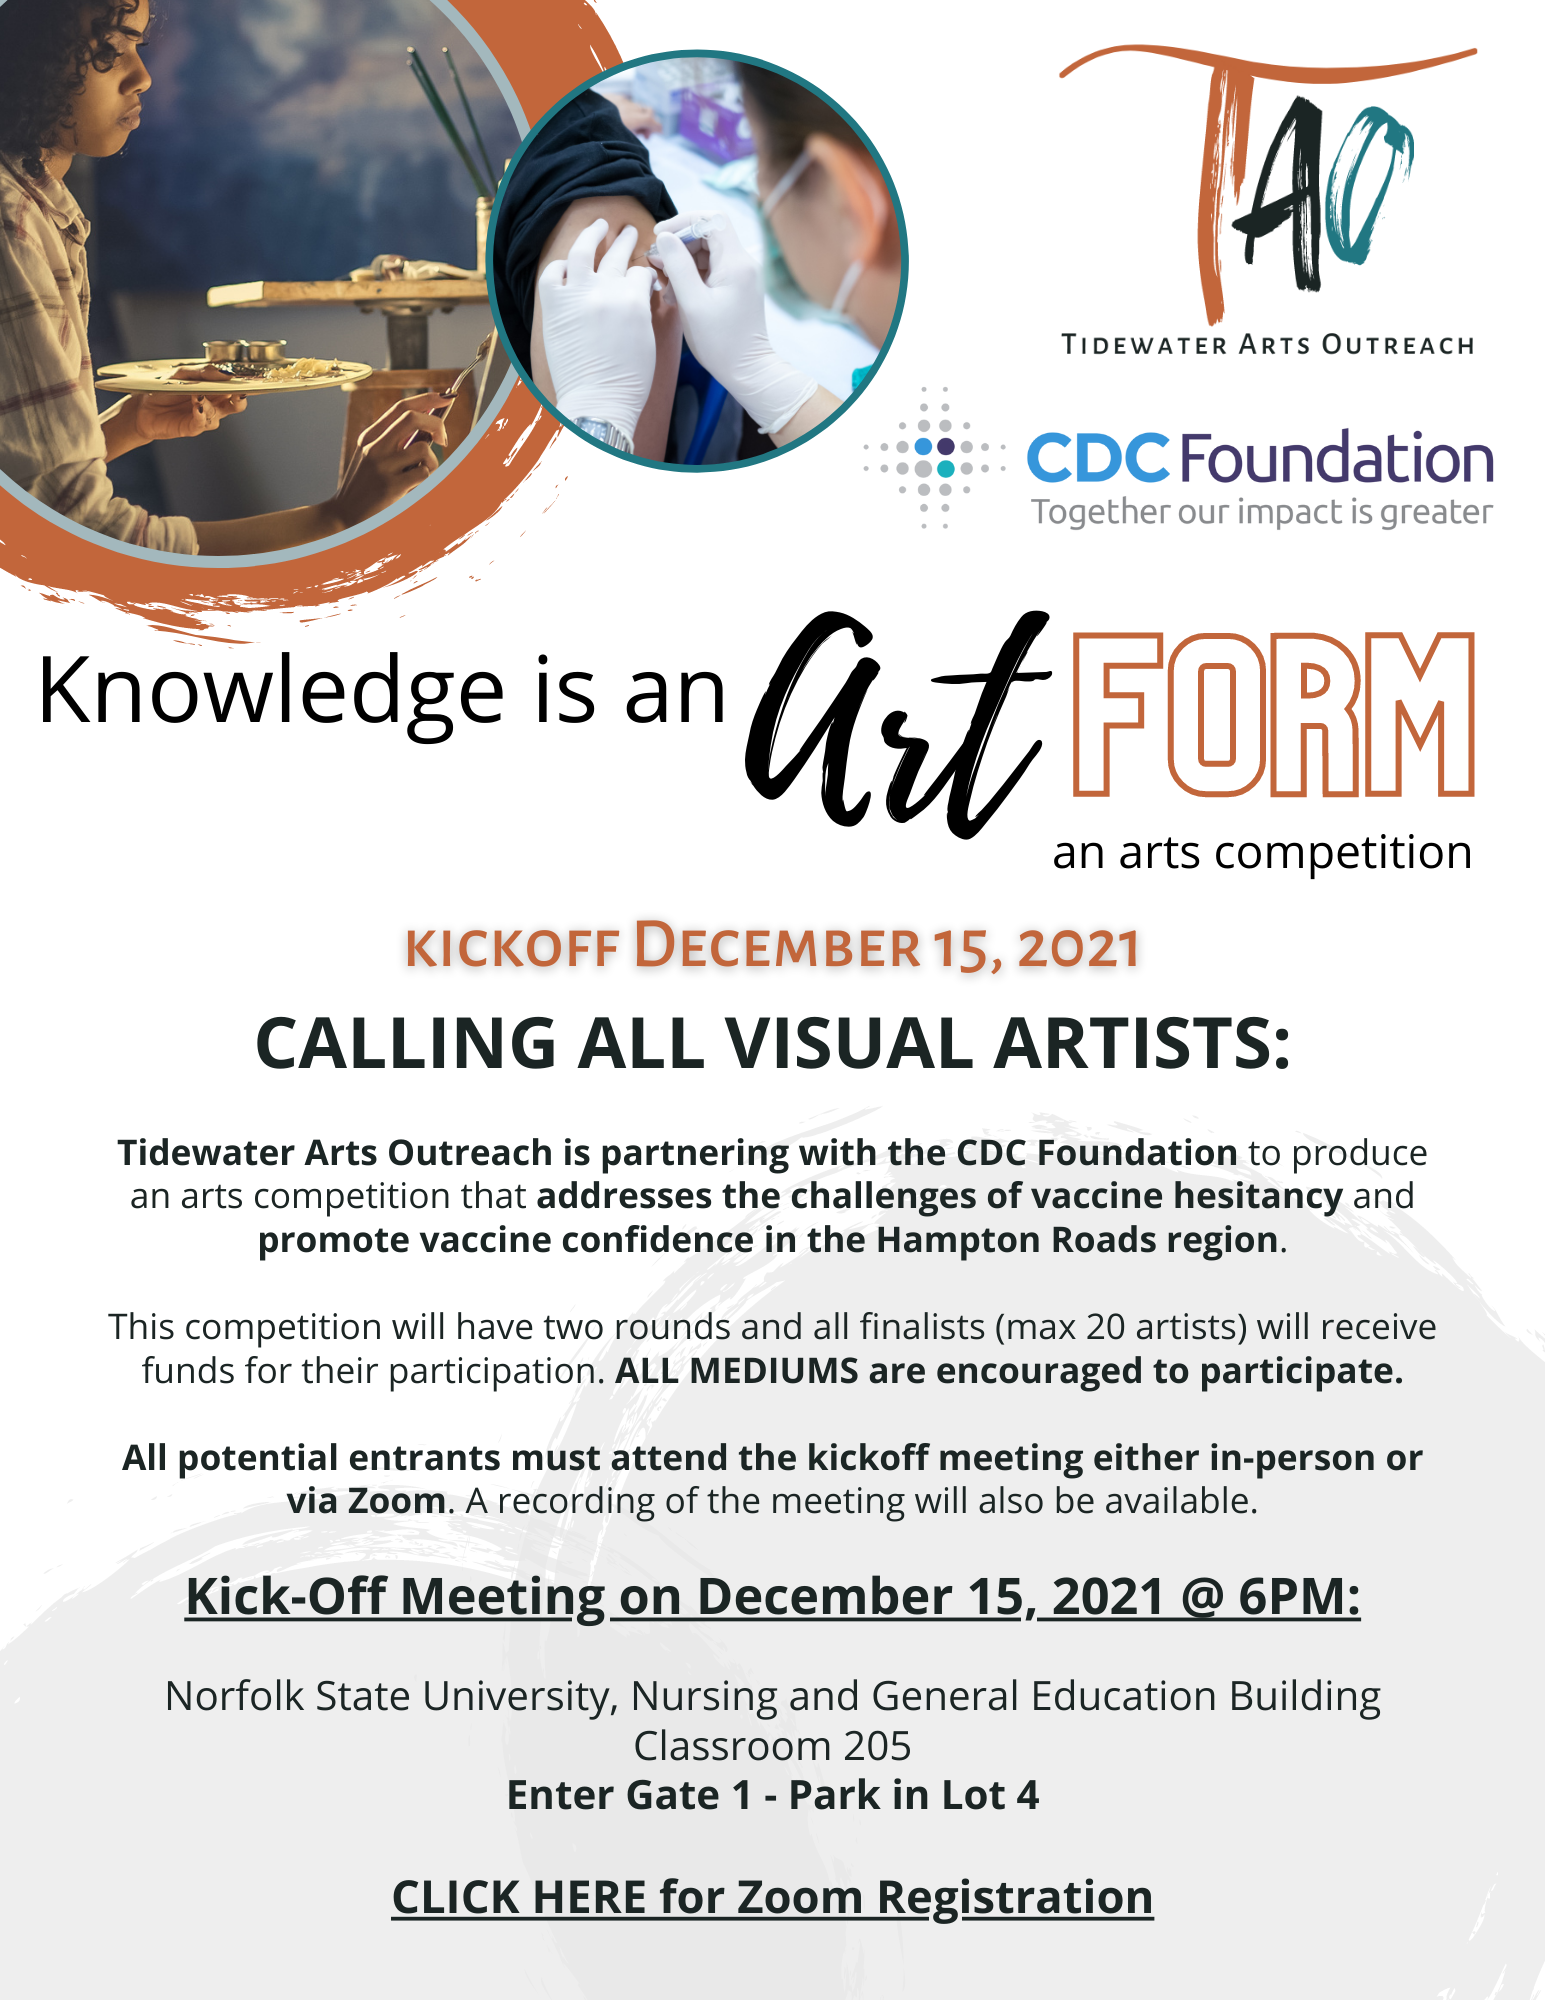 Knowledge is an Art Form Kickoff Meeting Flyer